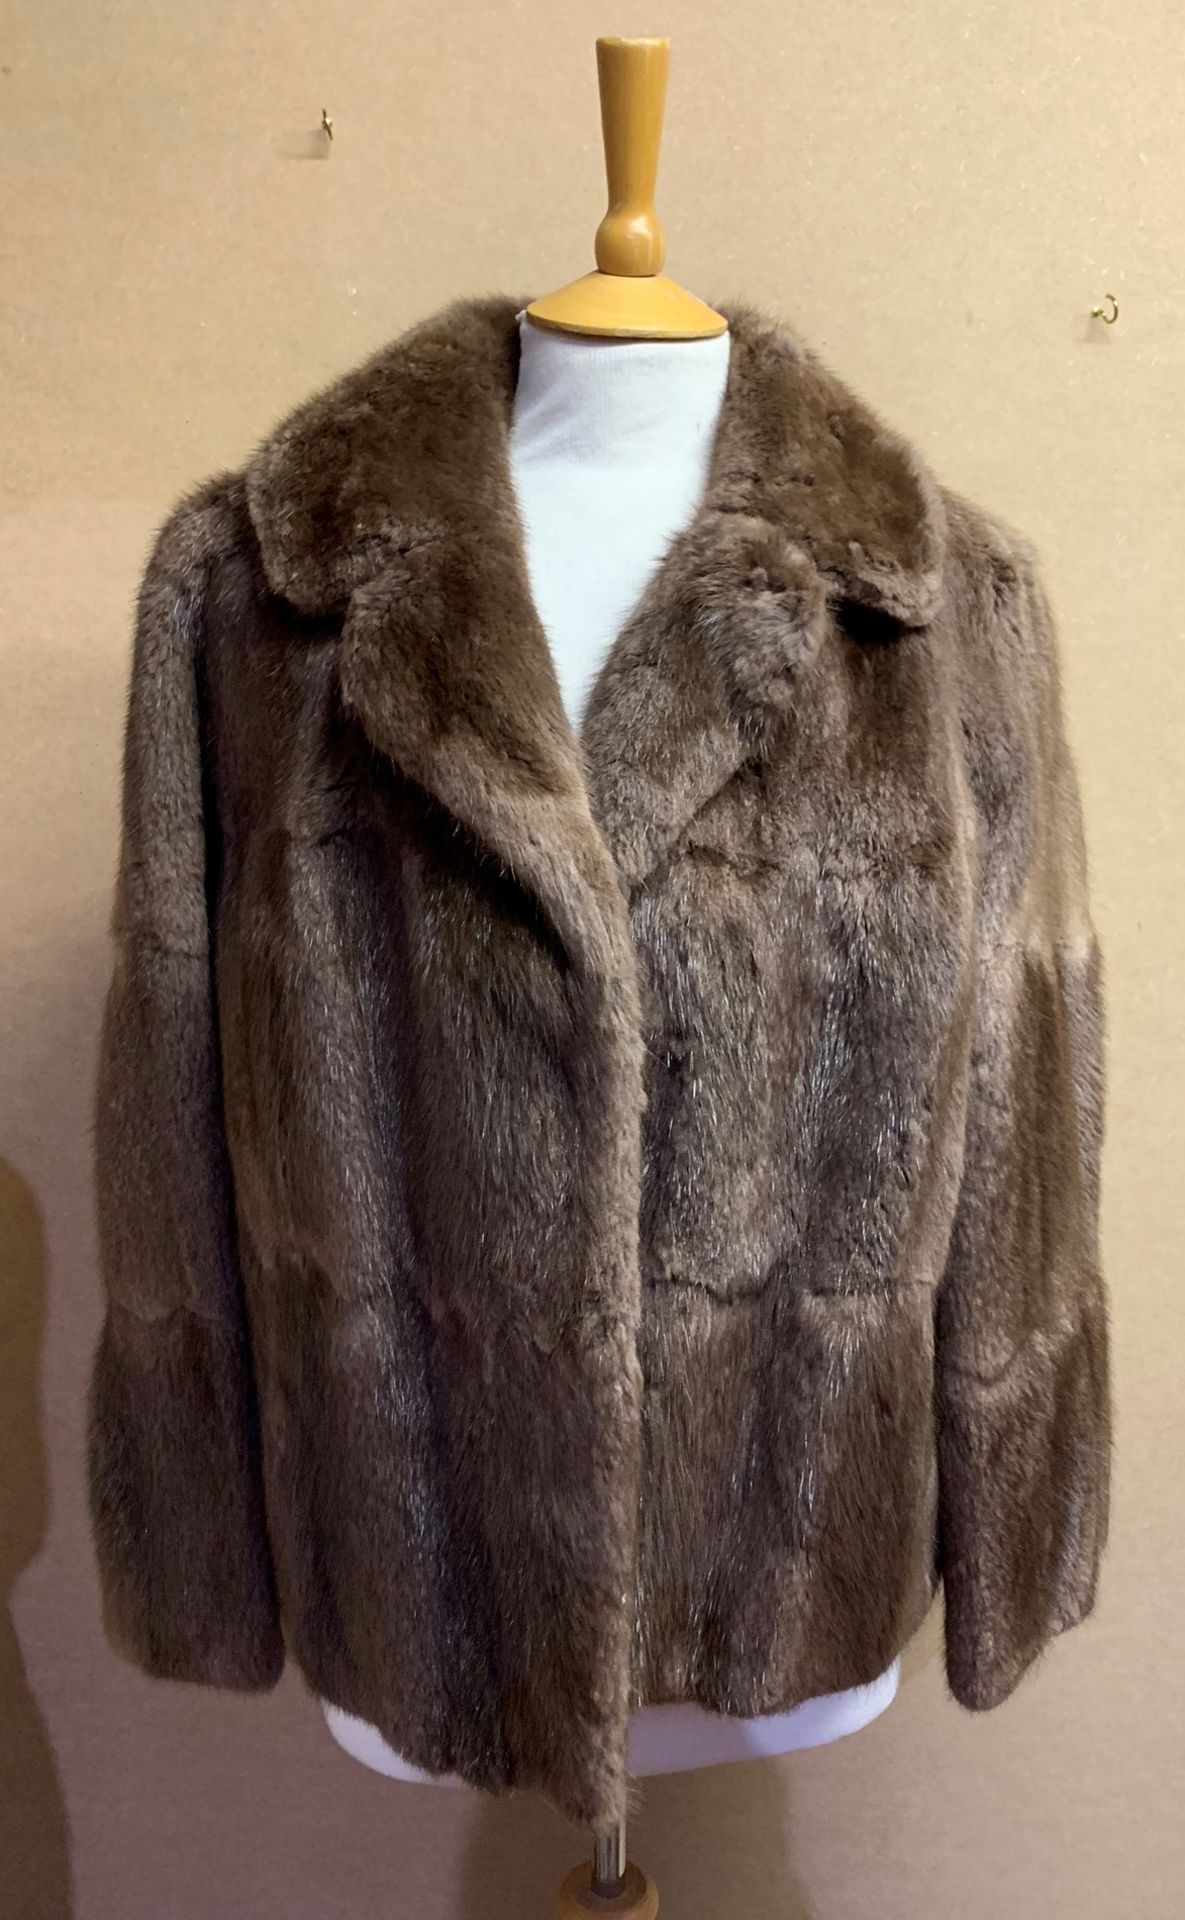 Lady's short fur jacket by Edelson